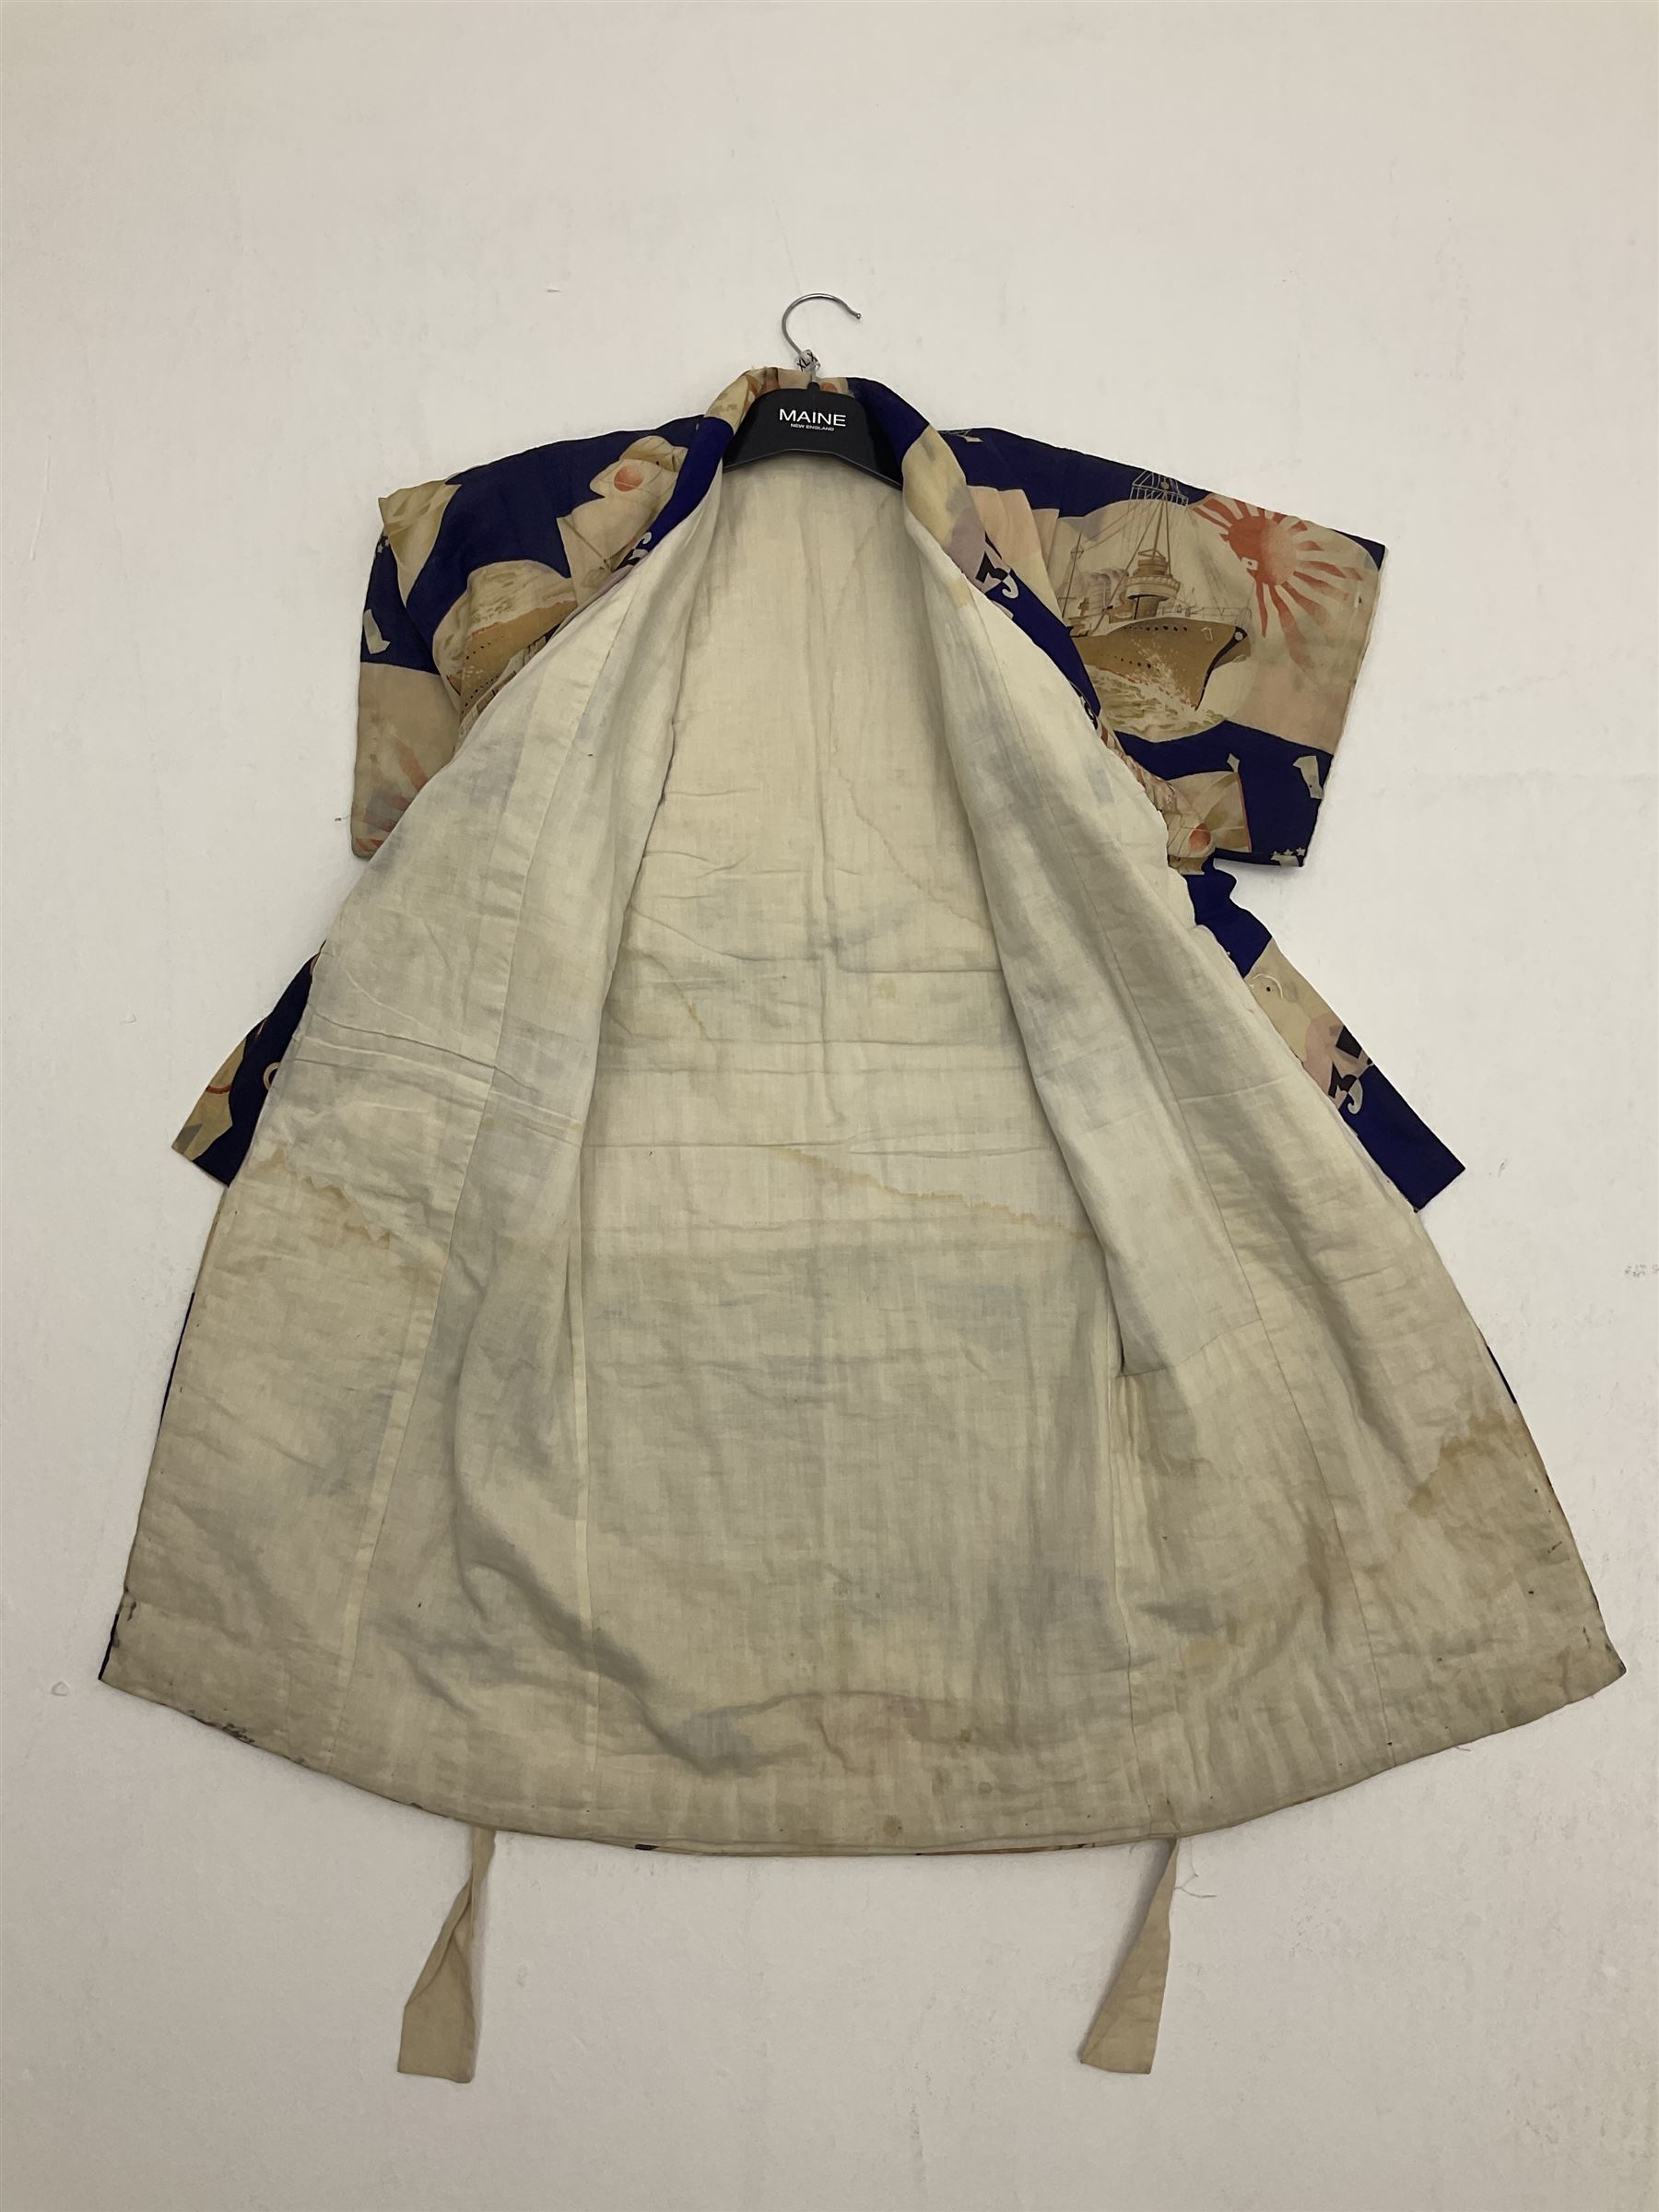 1930s Japanese fully lined kimono decorated with Japanese naval vessels and bi-planes - Image 18 of 24